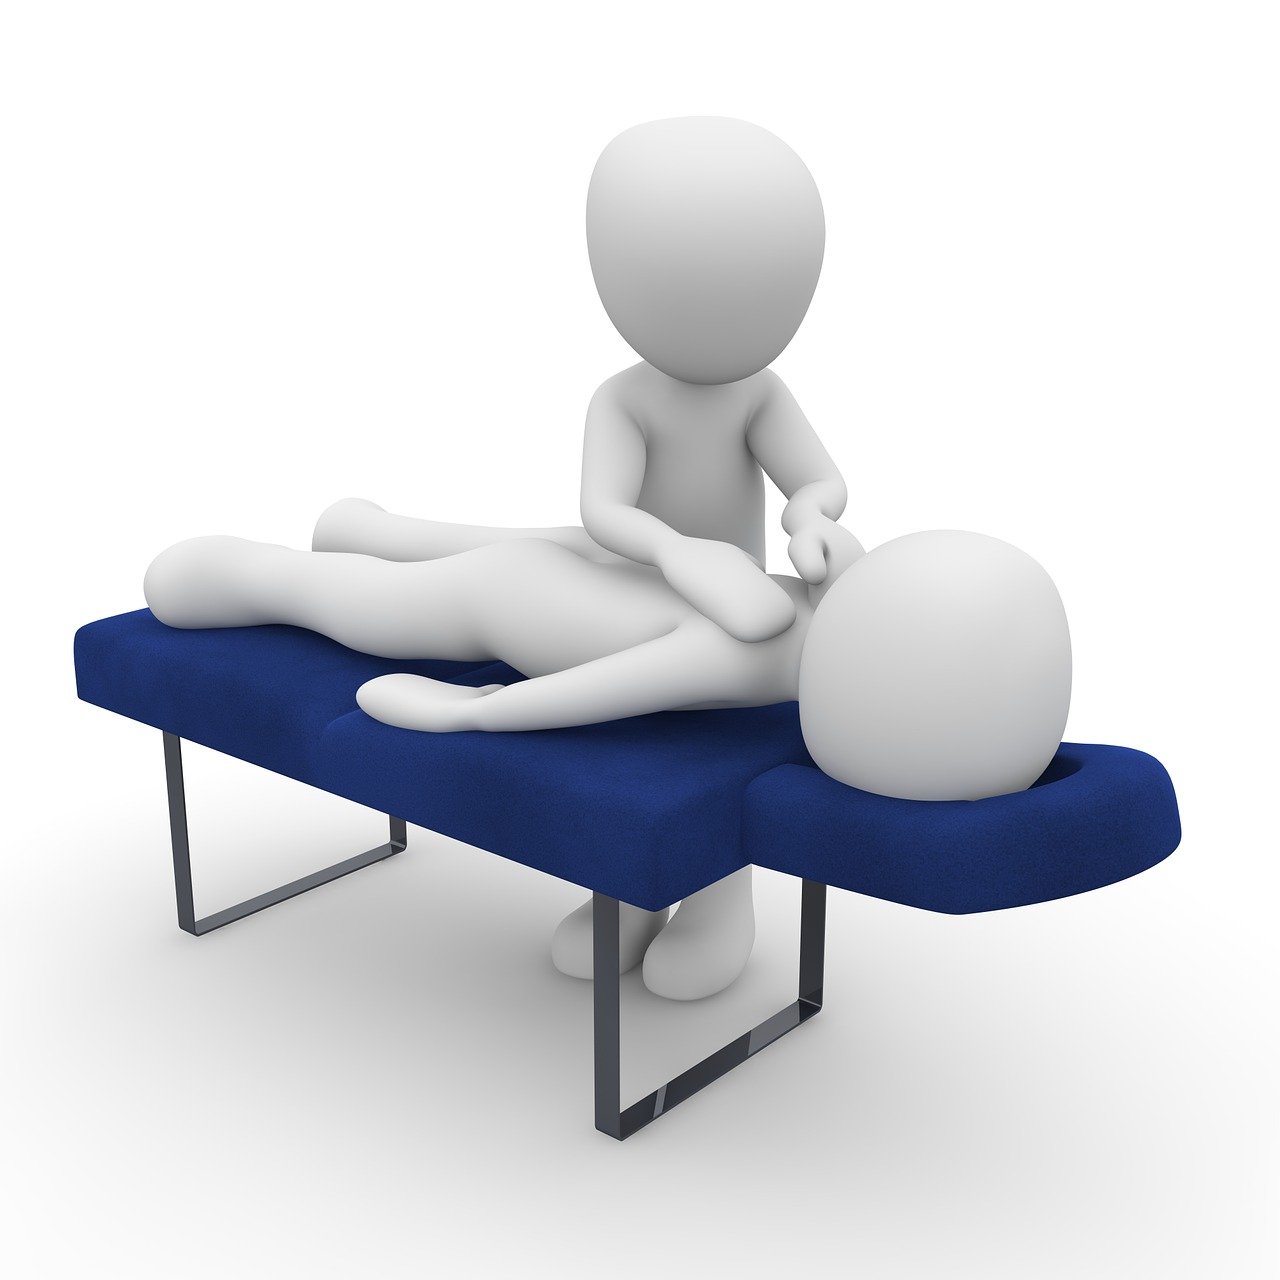 Physical Therapy - Sports Injuries: Prevention, Treatment and Rehabilitation